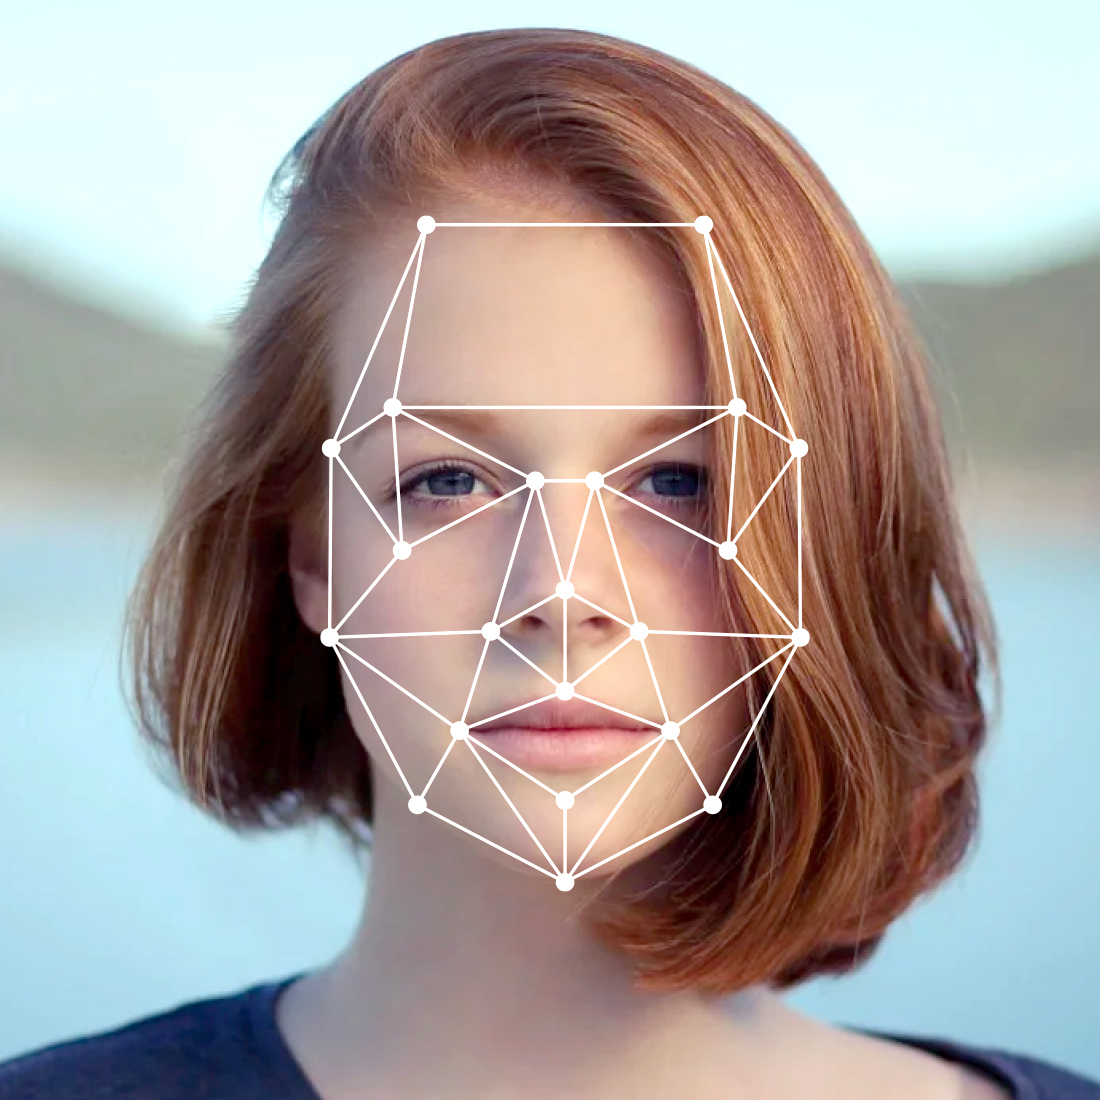 WTE Solutions Facial Recognition The Good And The